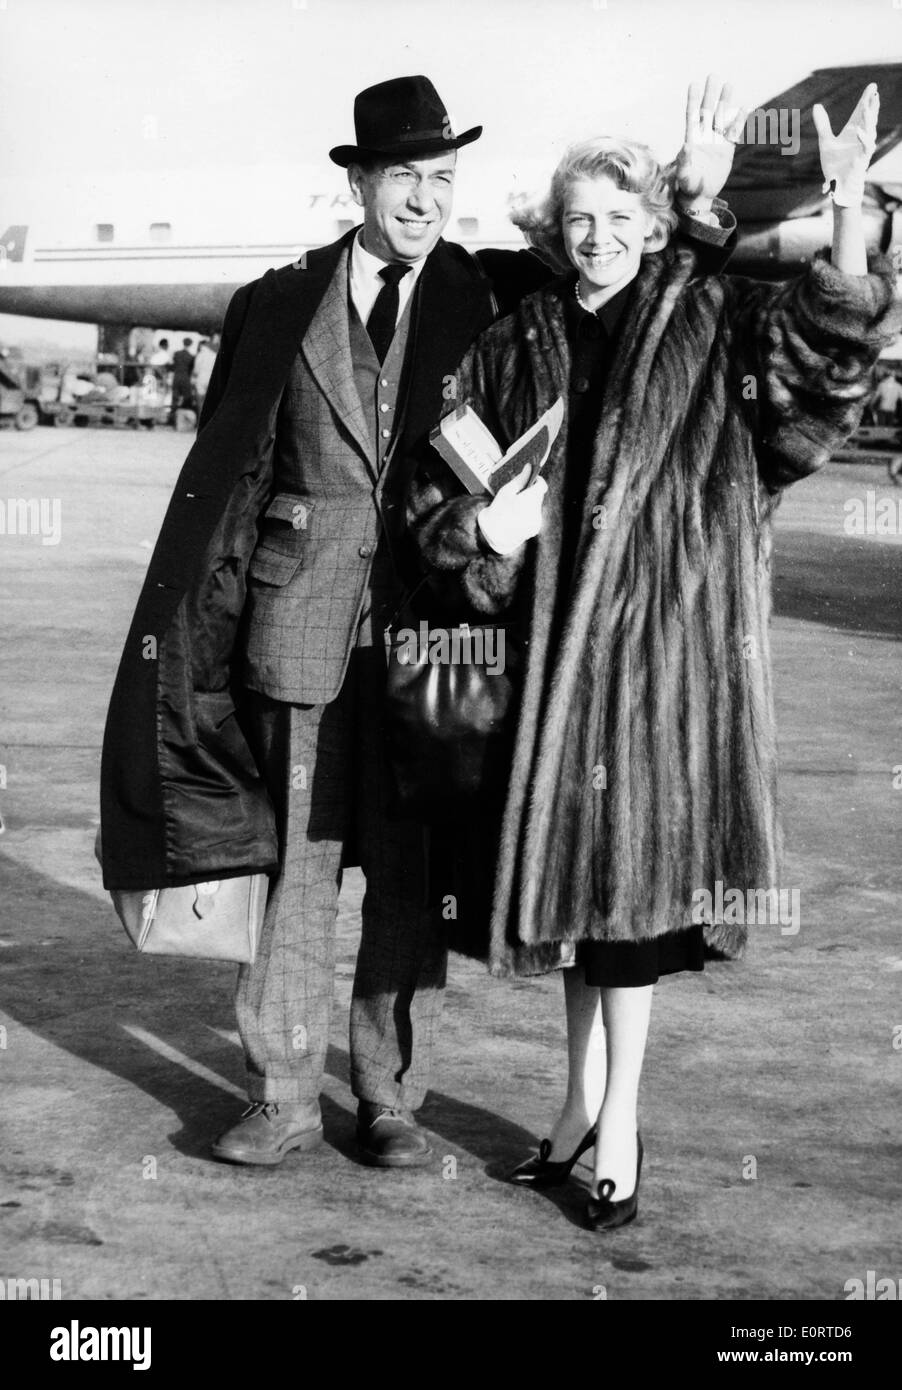 Actors Jose Ferrer and Rosemary Clooney at airport Stock Photo